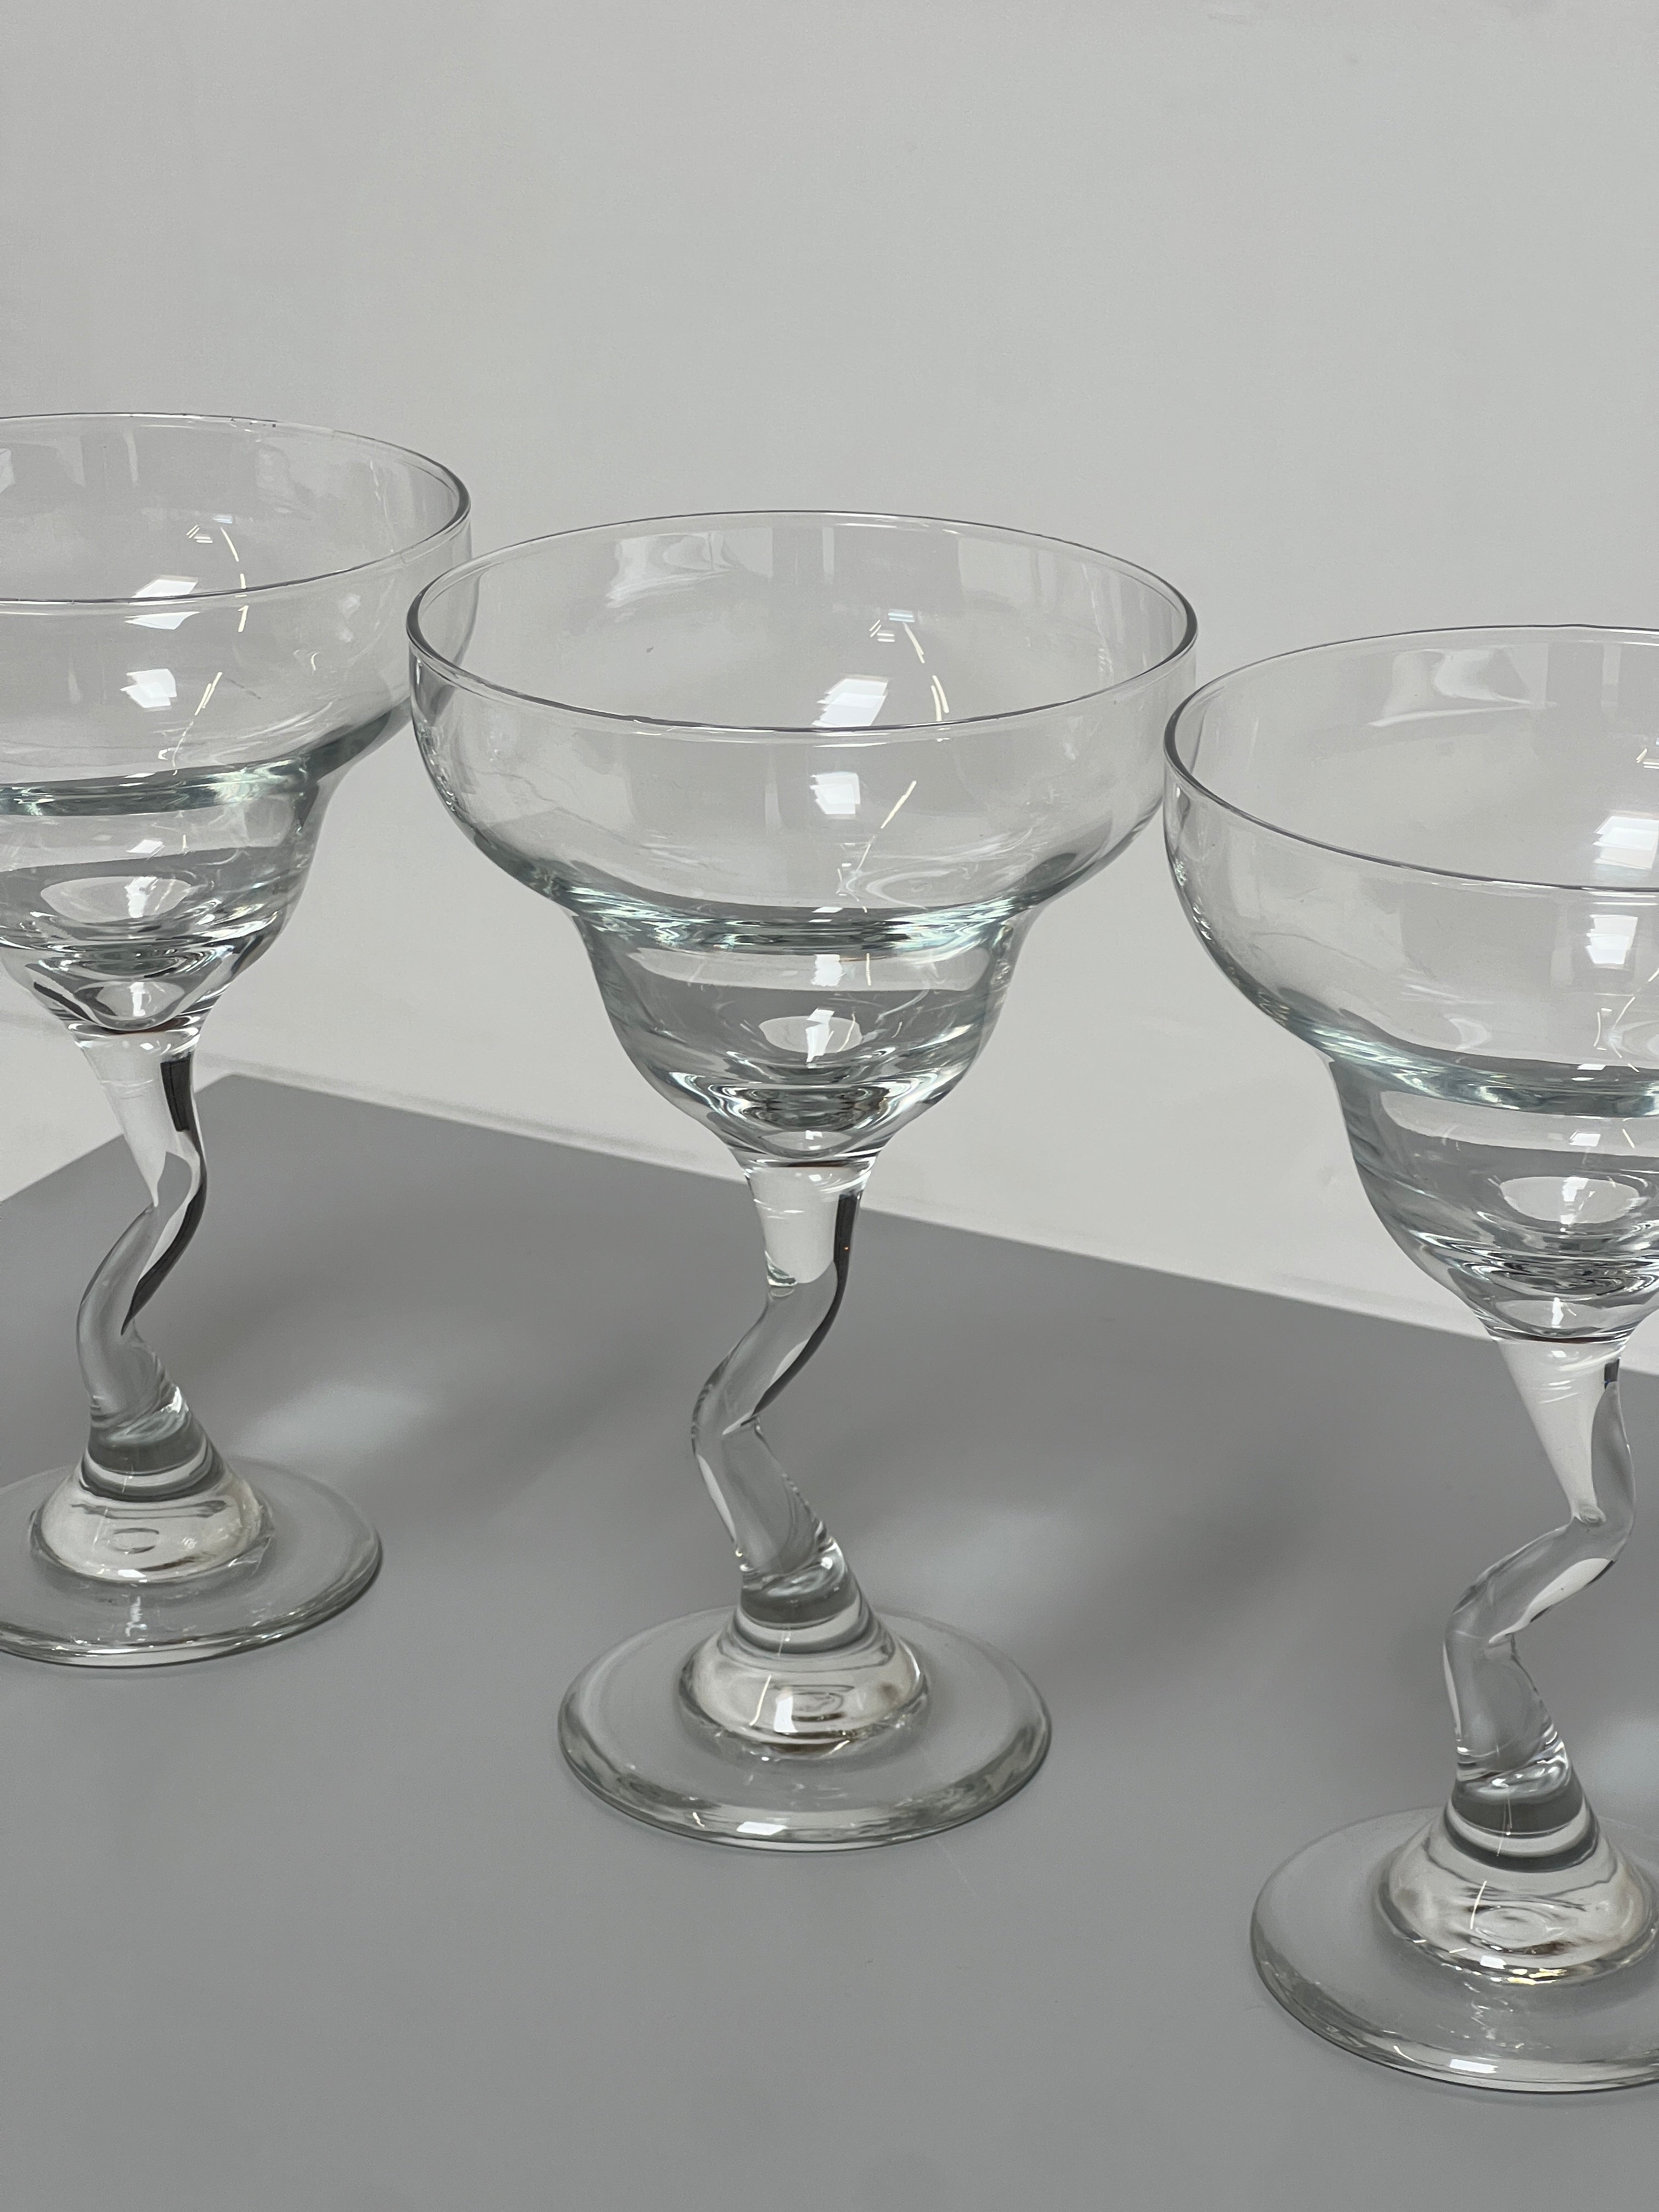 Squiggle Margarita Glasses by Libbey